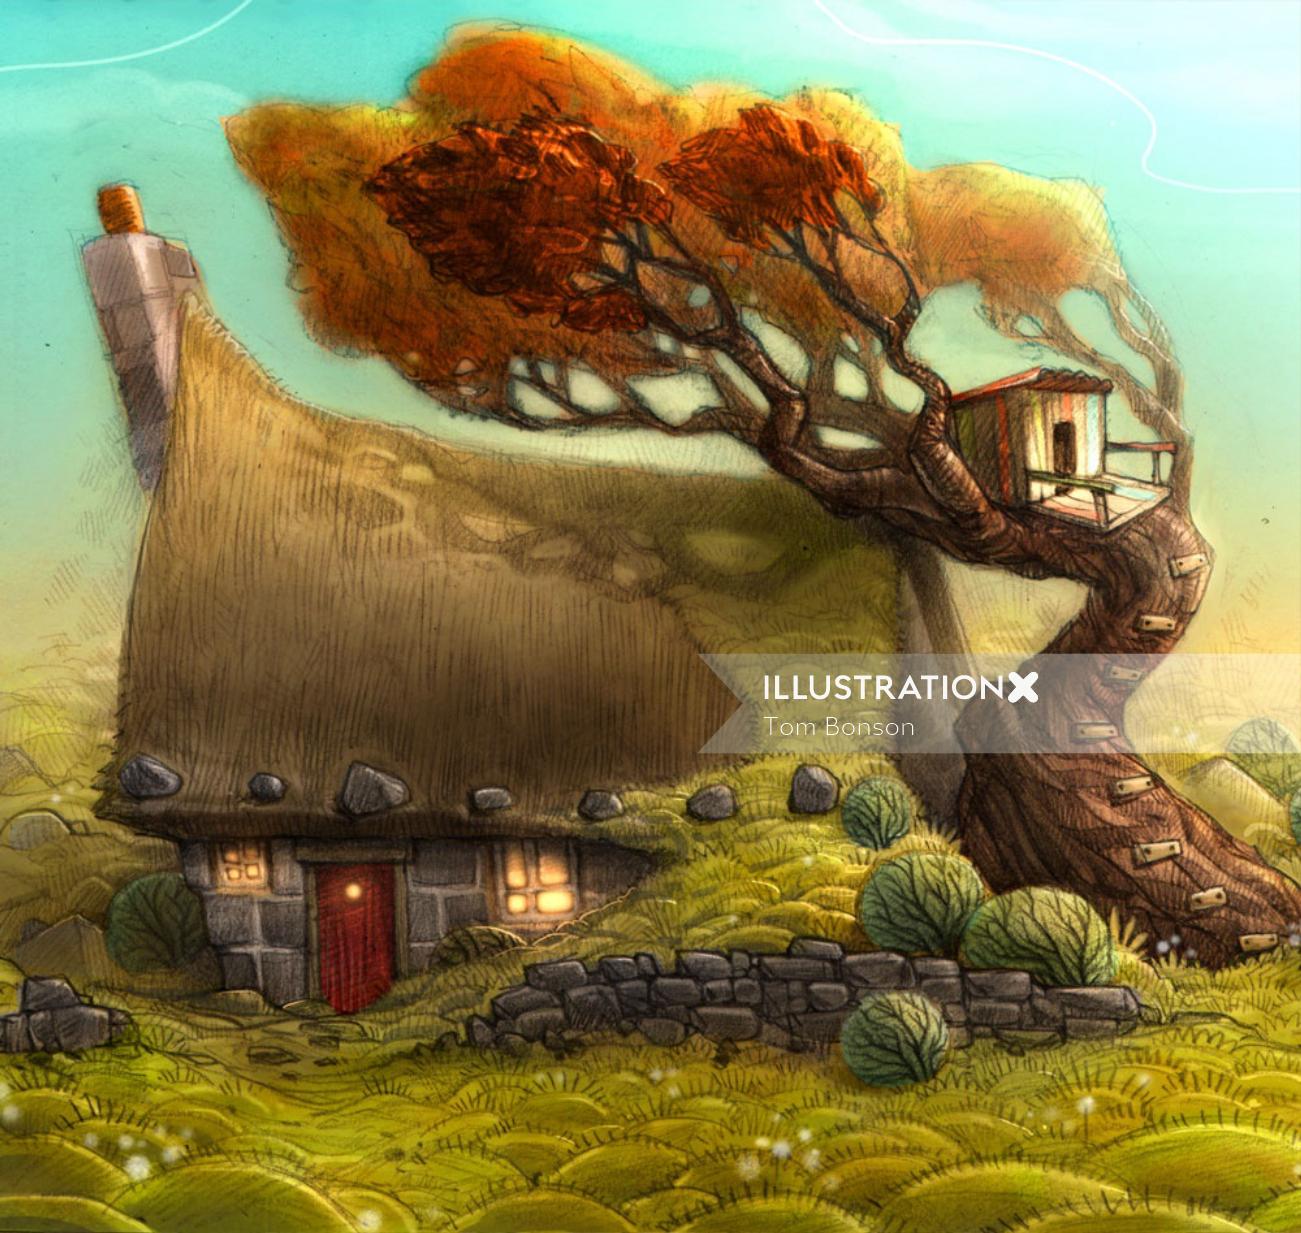 An Illustration of Cottage and Tree House